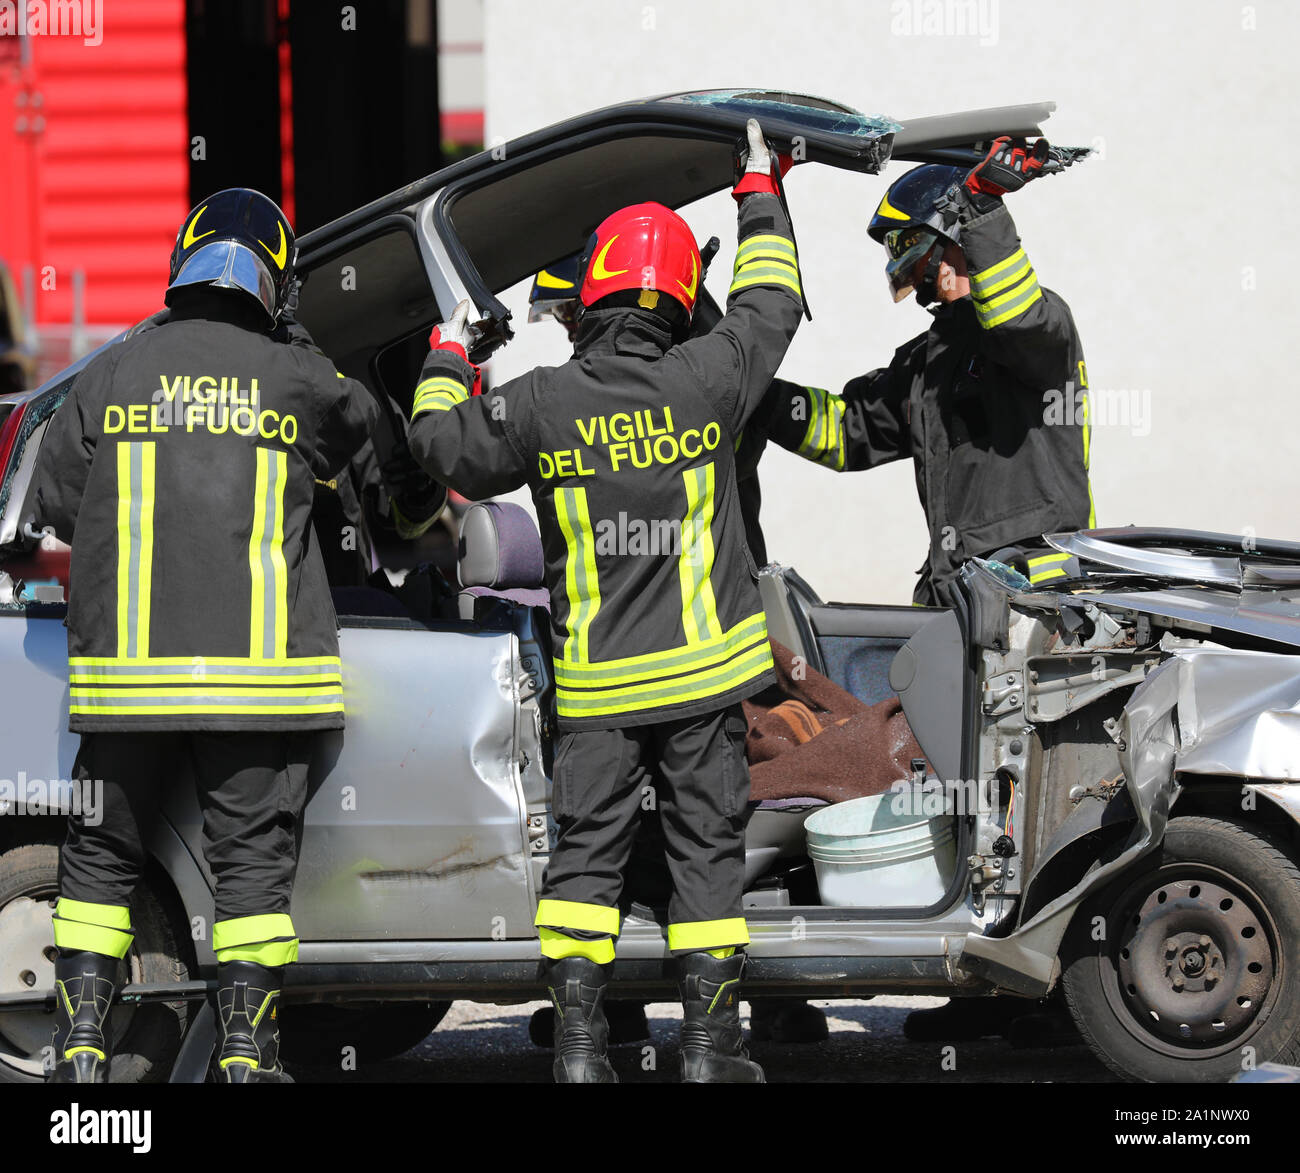 Rome, RM, Italy - May 16, 2019: italian firemen raise the roof of the car to extract the wounded after road accident Stock Photo